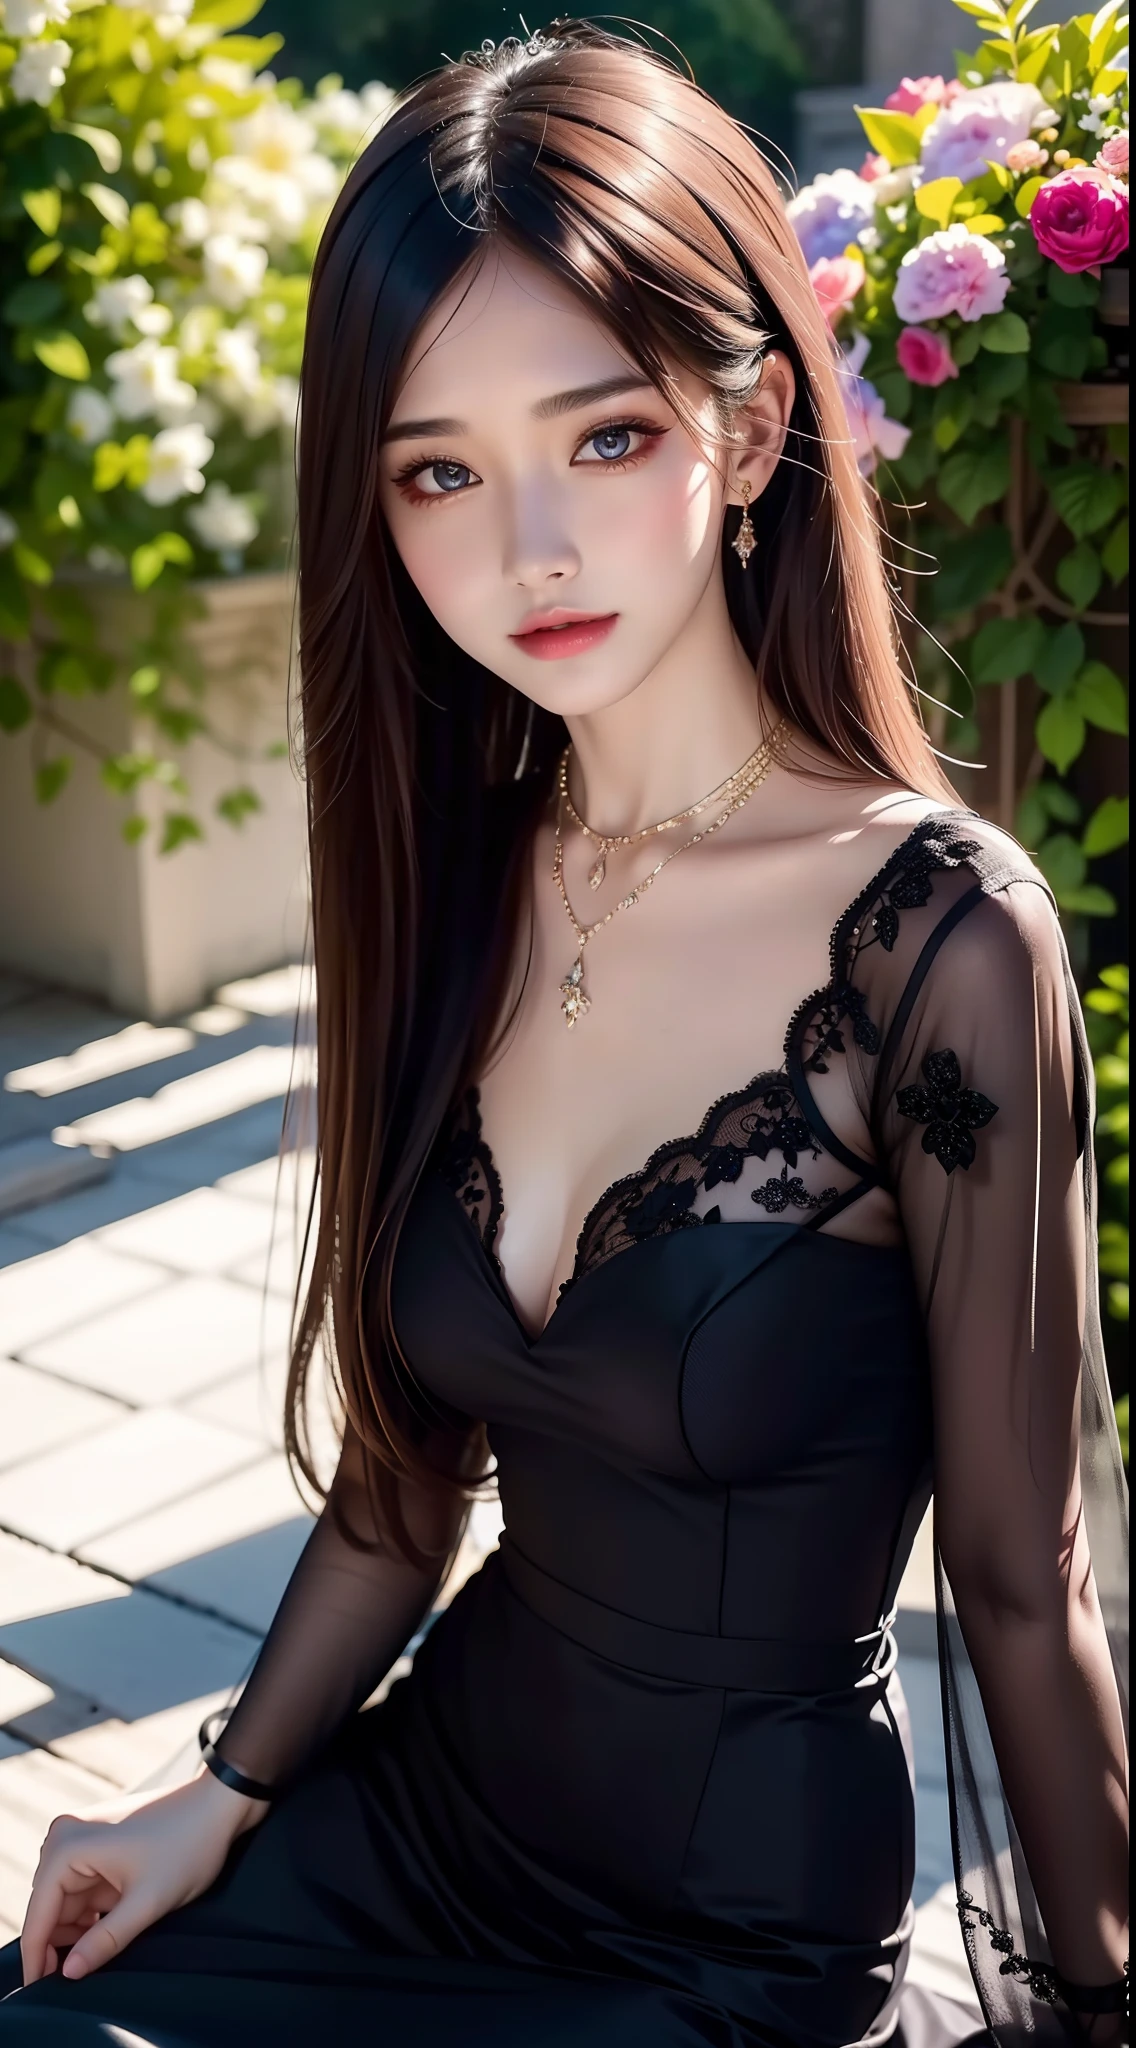 4K ultra hd, masterpiece, a cute girl, good face, detailed eyes, liquid lipstick, long hair, spreading hair, necklace, beaeutiful dress, long dress, marriage dress, black color, high lights, light effects, shining, realistic background, nature background, flowers, sitting, whole body capture,